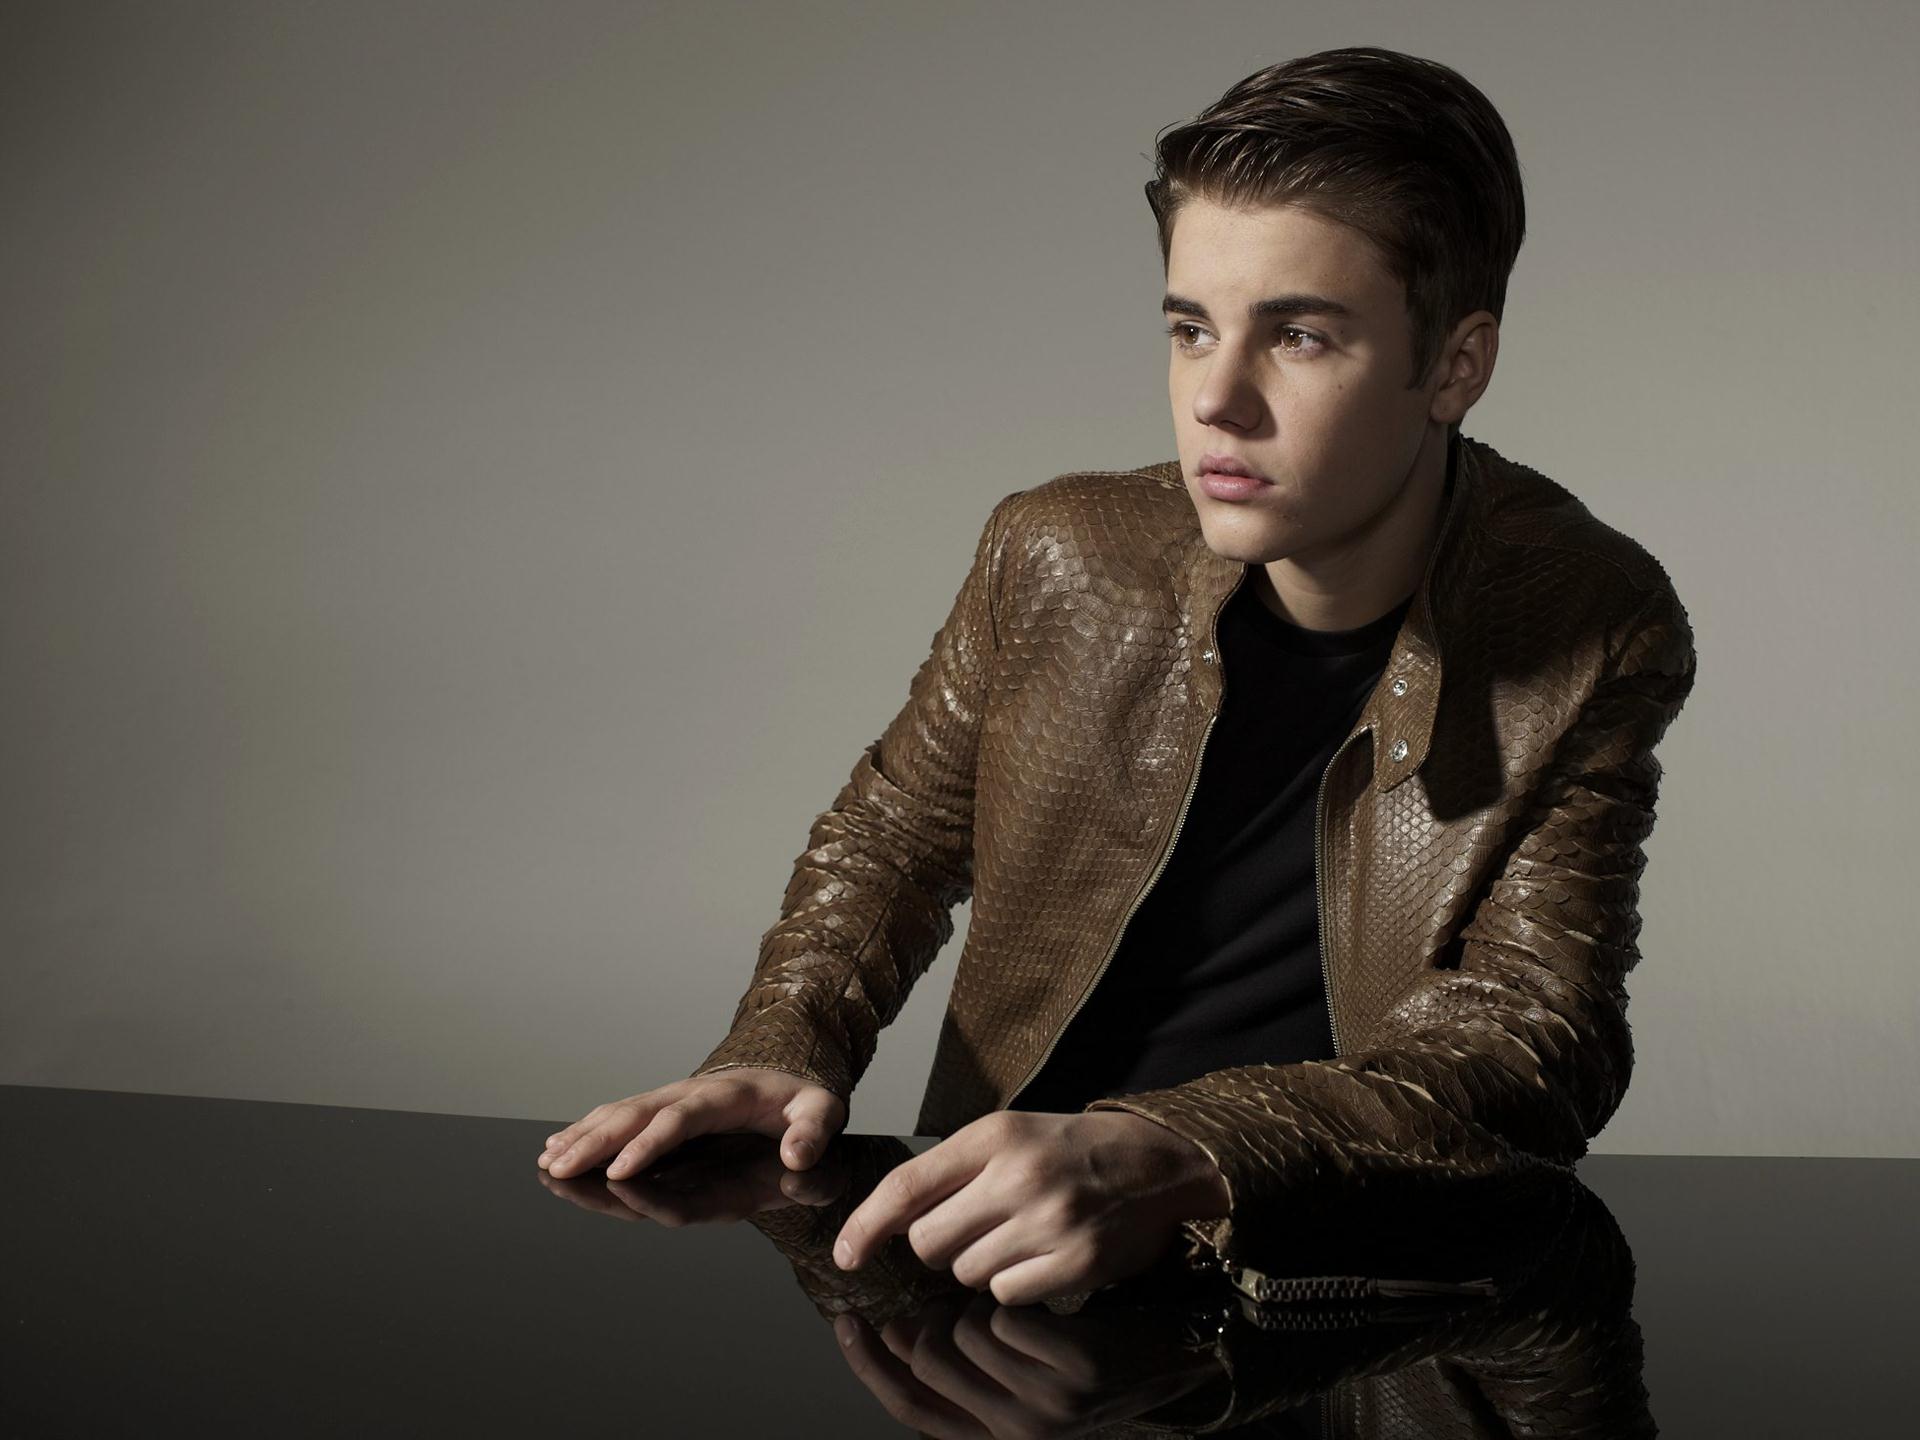 Awesome Justin Bieber Photoshoot HD Wallpaper Picture